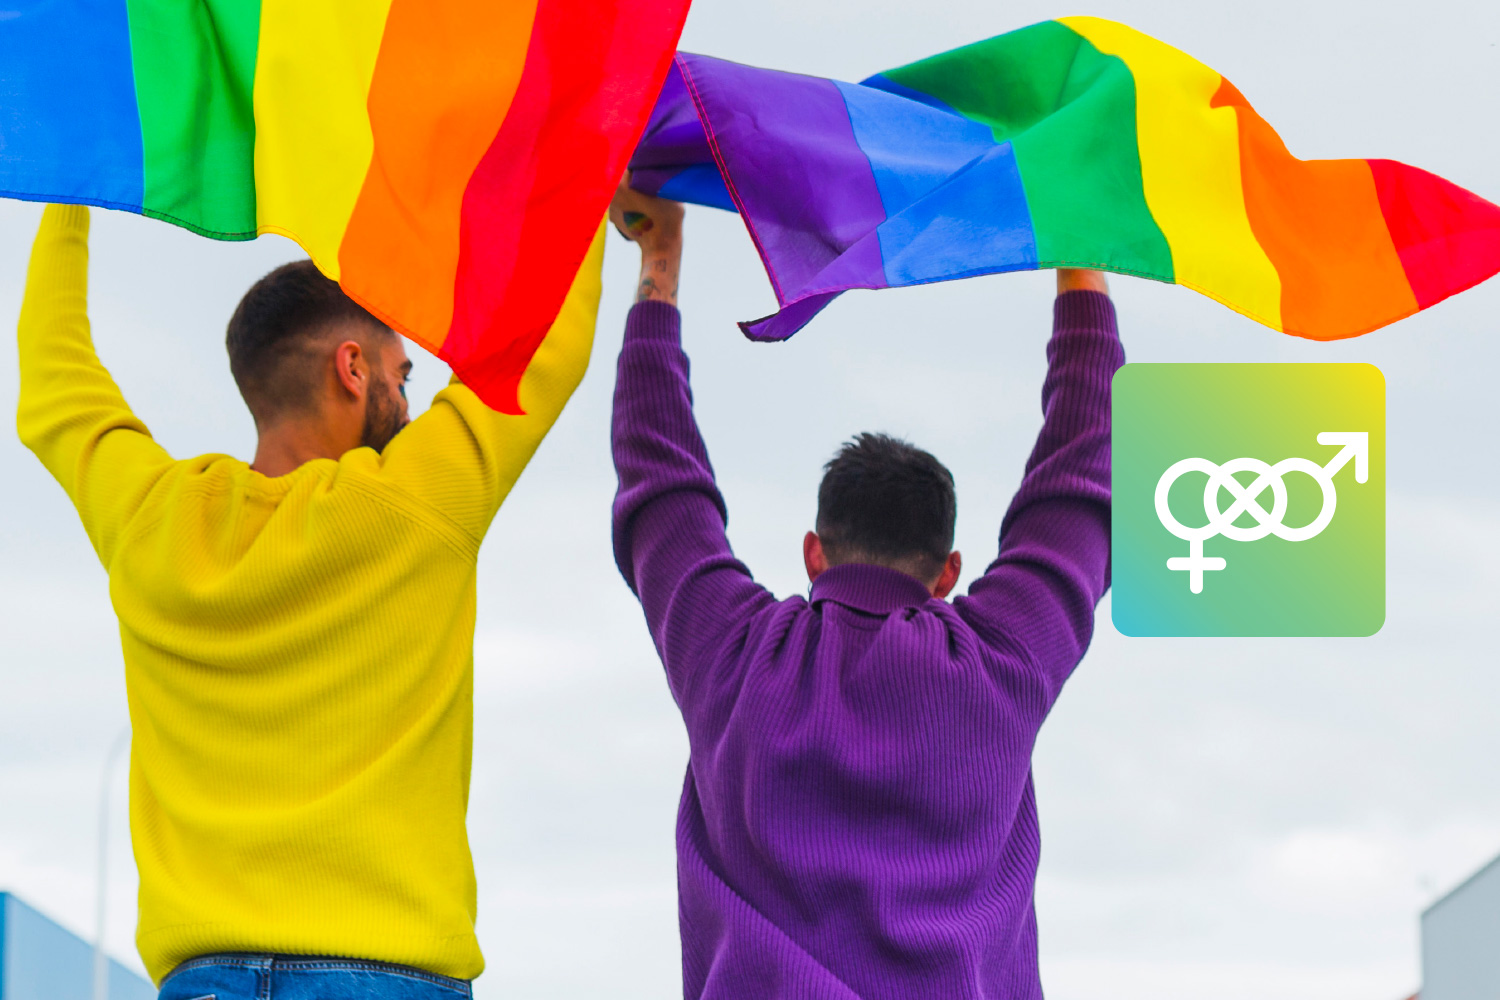 Two people holding rainbow flags